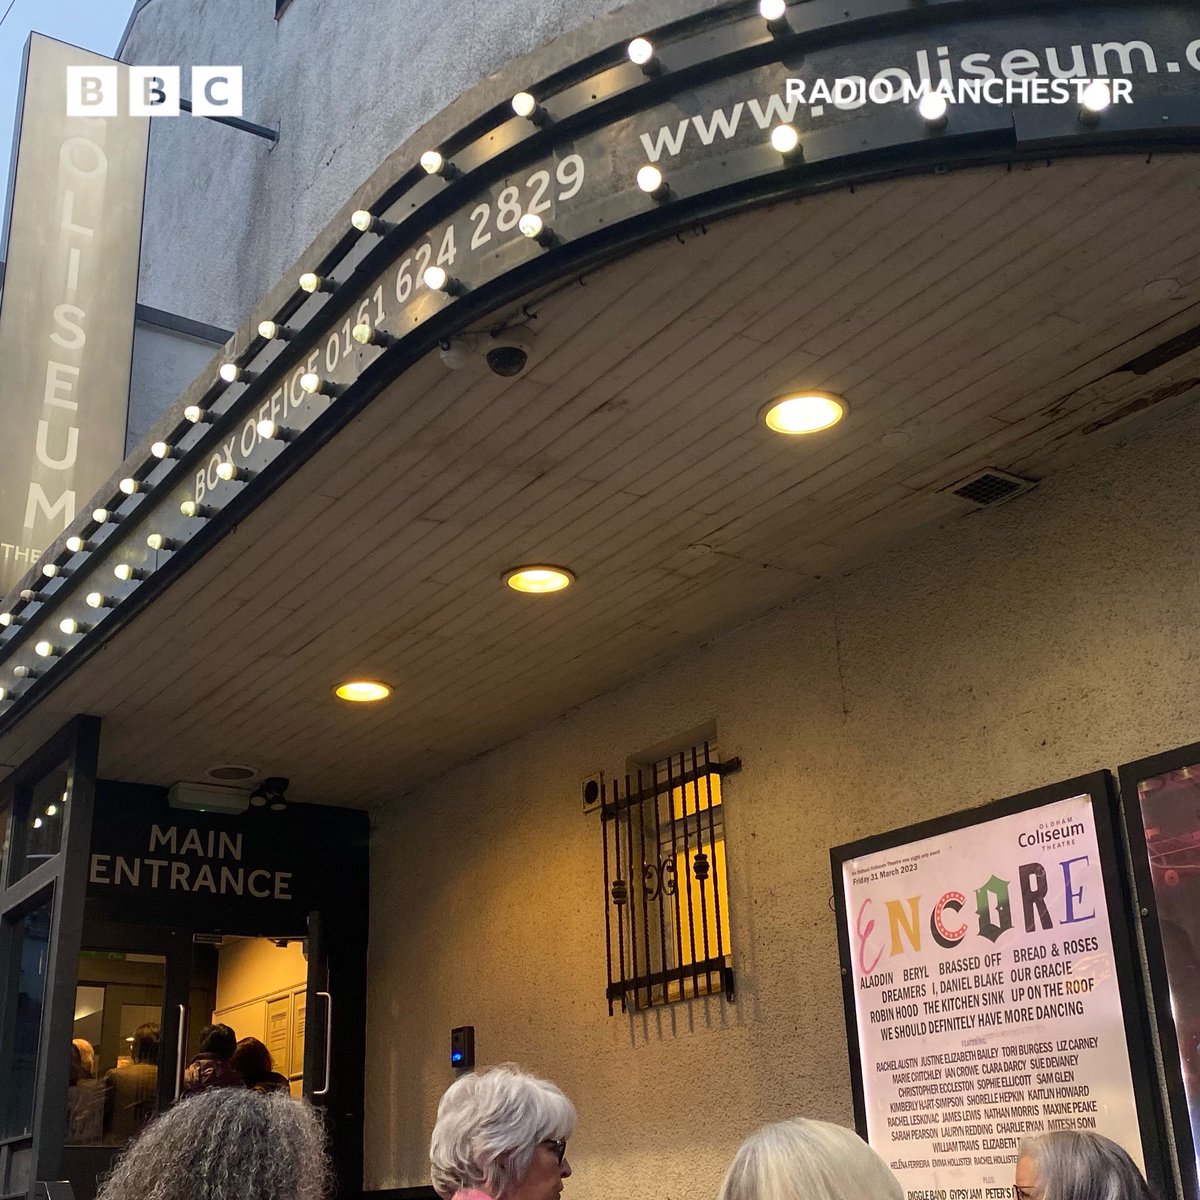 The curtain will fall for the final time tonight at @OldhamColiseum🎭

This comes as their Arts Council Funding was cut

They are putting on a one night only show called ‘Encore’ featuring @MPeakeOfficial & other local performers

Listen on @BBCRadioManc tomorrow